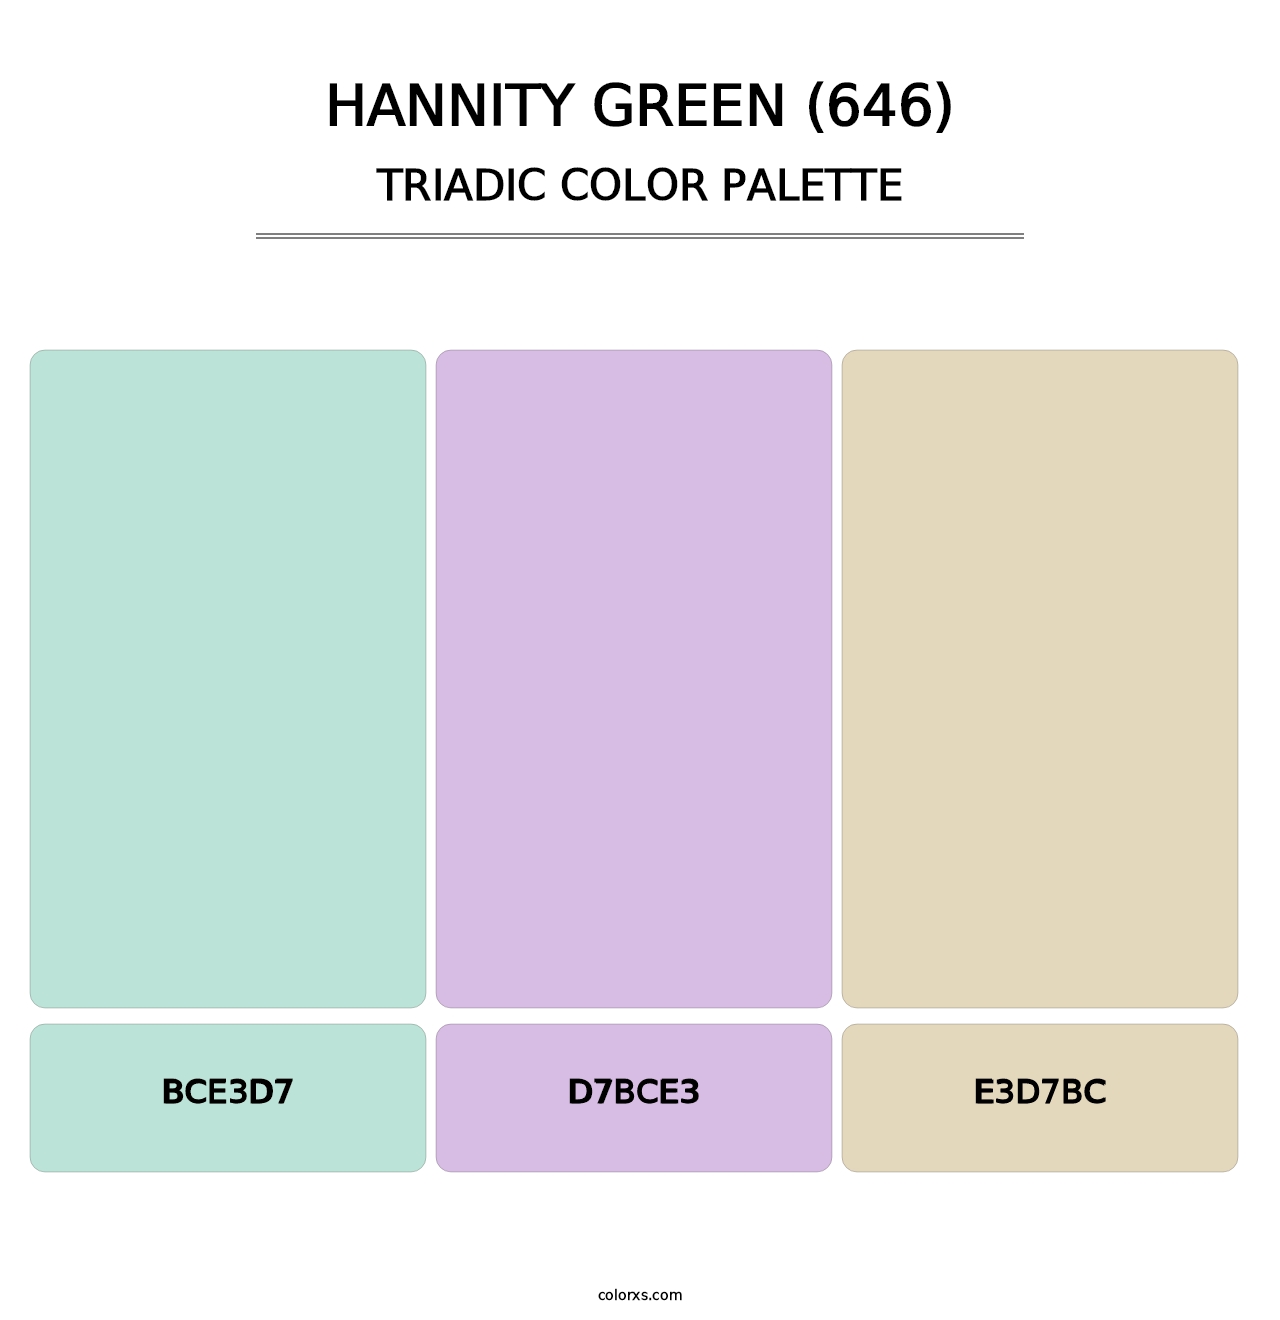 Hannity Green (646) - Triadic Color Palette